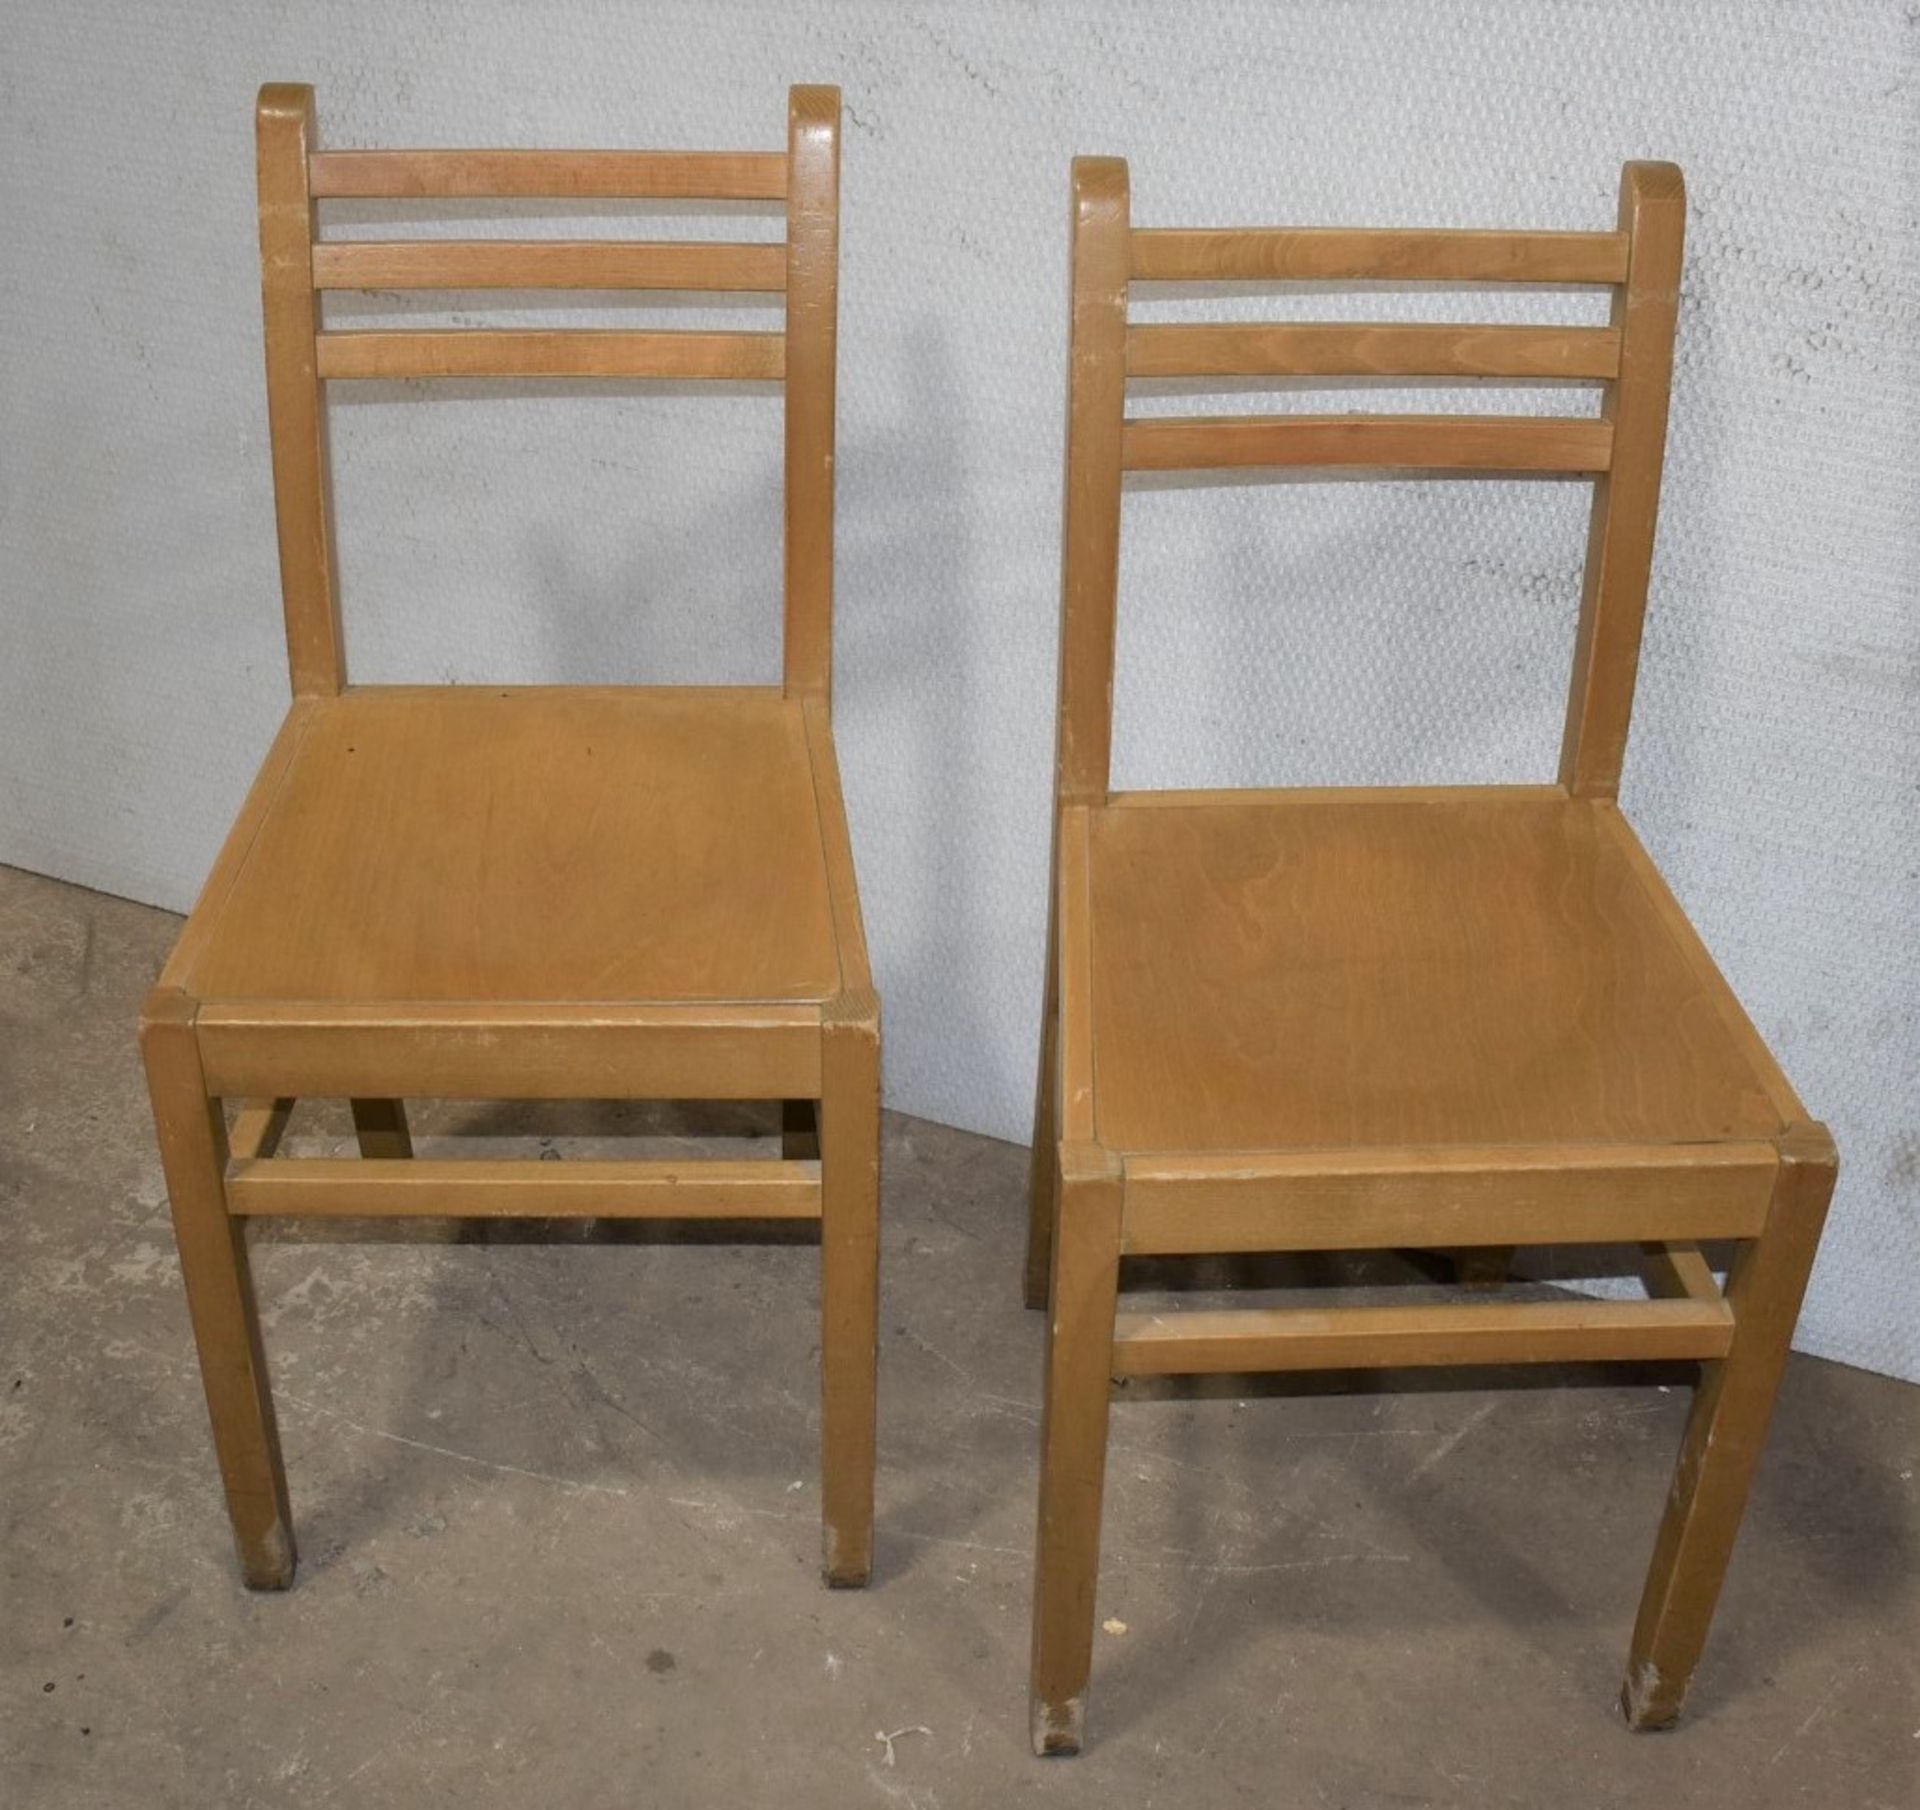 8 x Restaurant Dining Chairs With a Light Wood Finish - Image 3 of 5